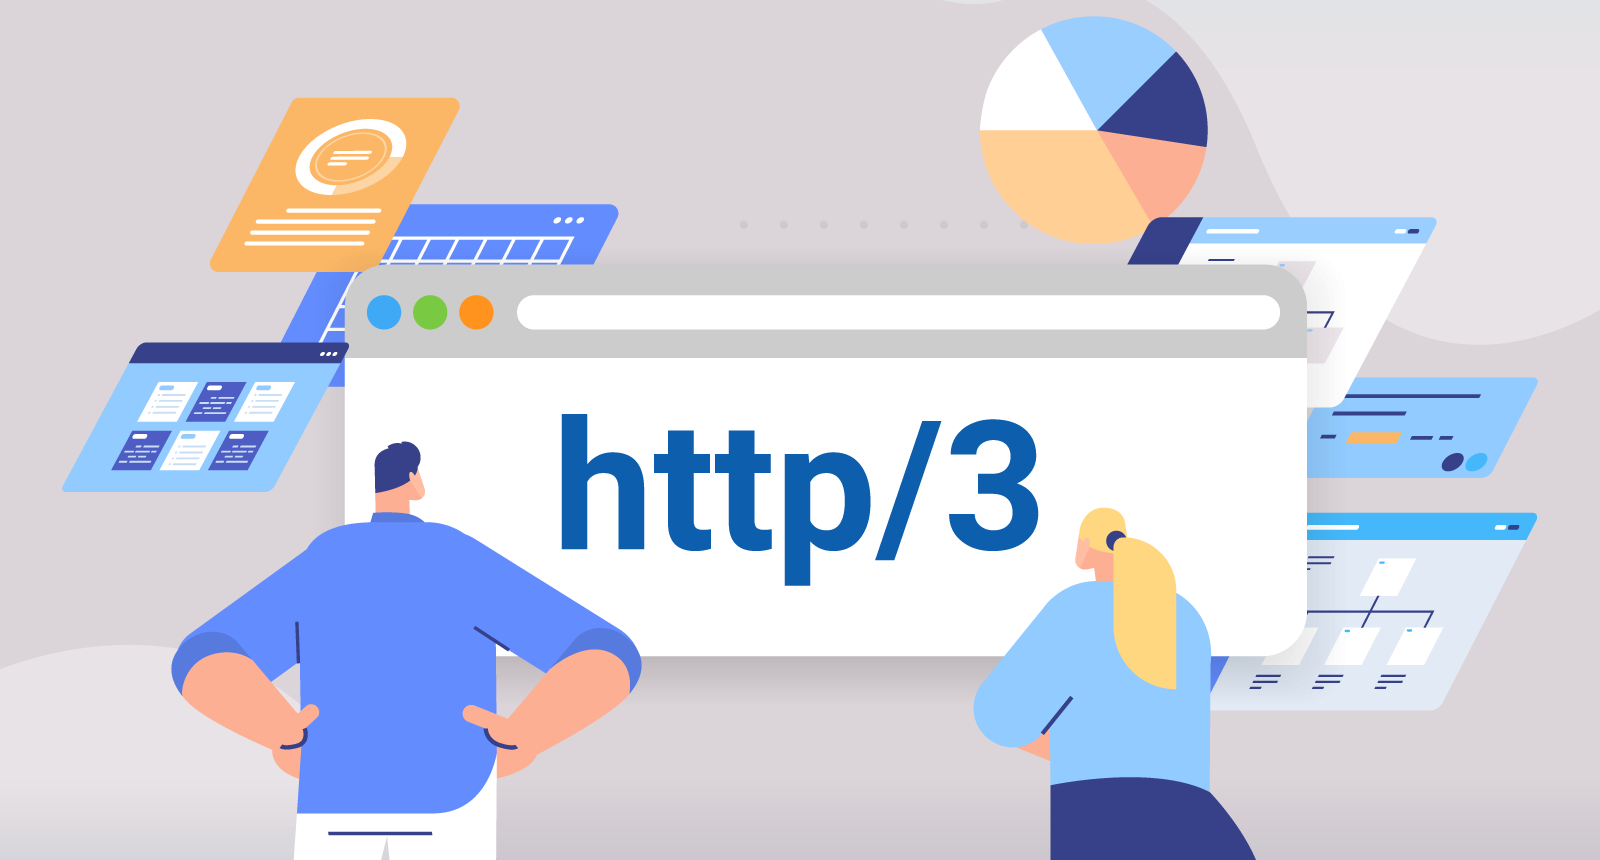 HTTP/3: Has your company adopted it yet?